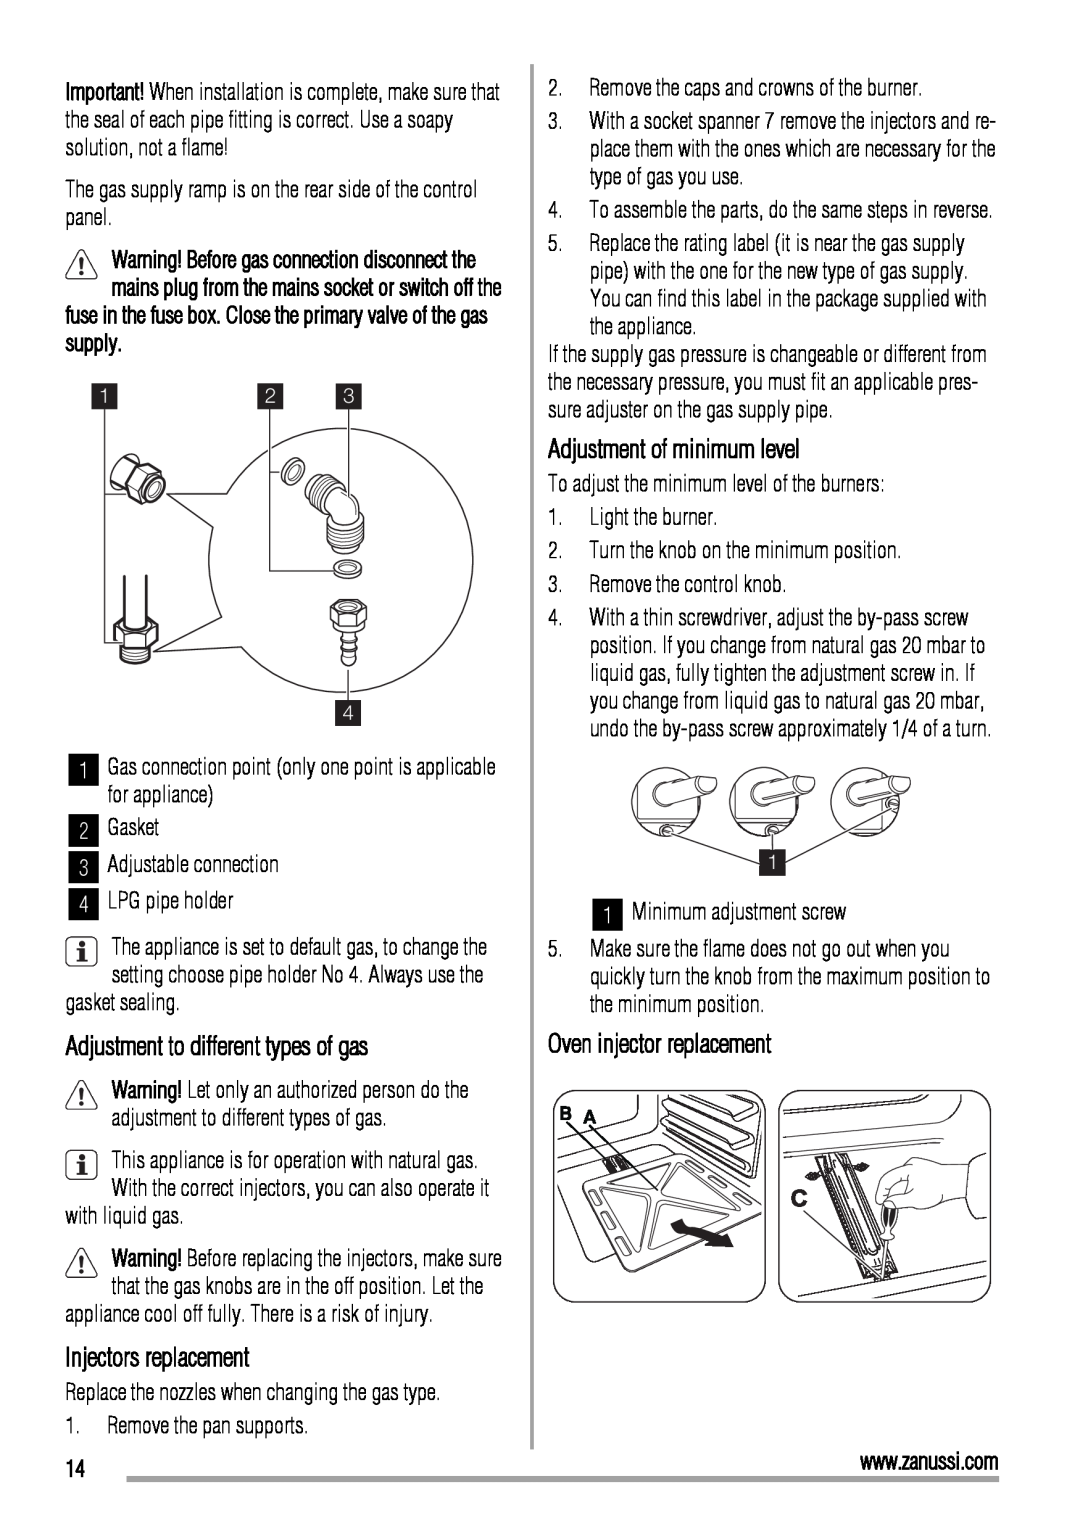 Zanussi ZCG560G user manual Adjustment to different types of gas, Injectors replacement, Adjustment of minimum level 